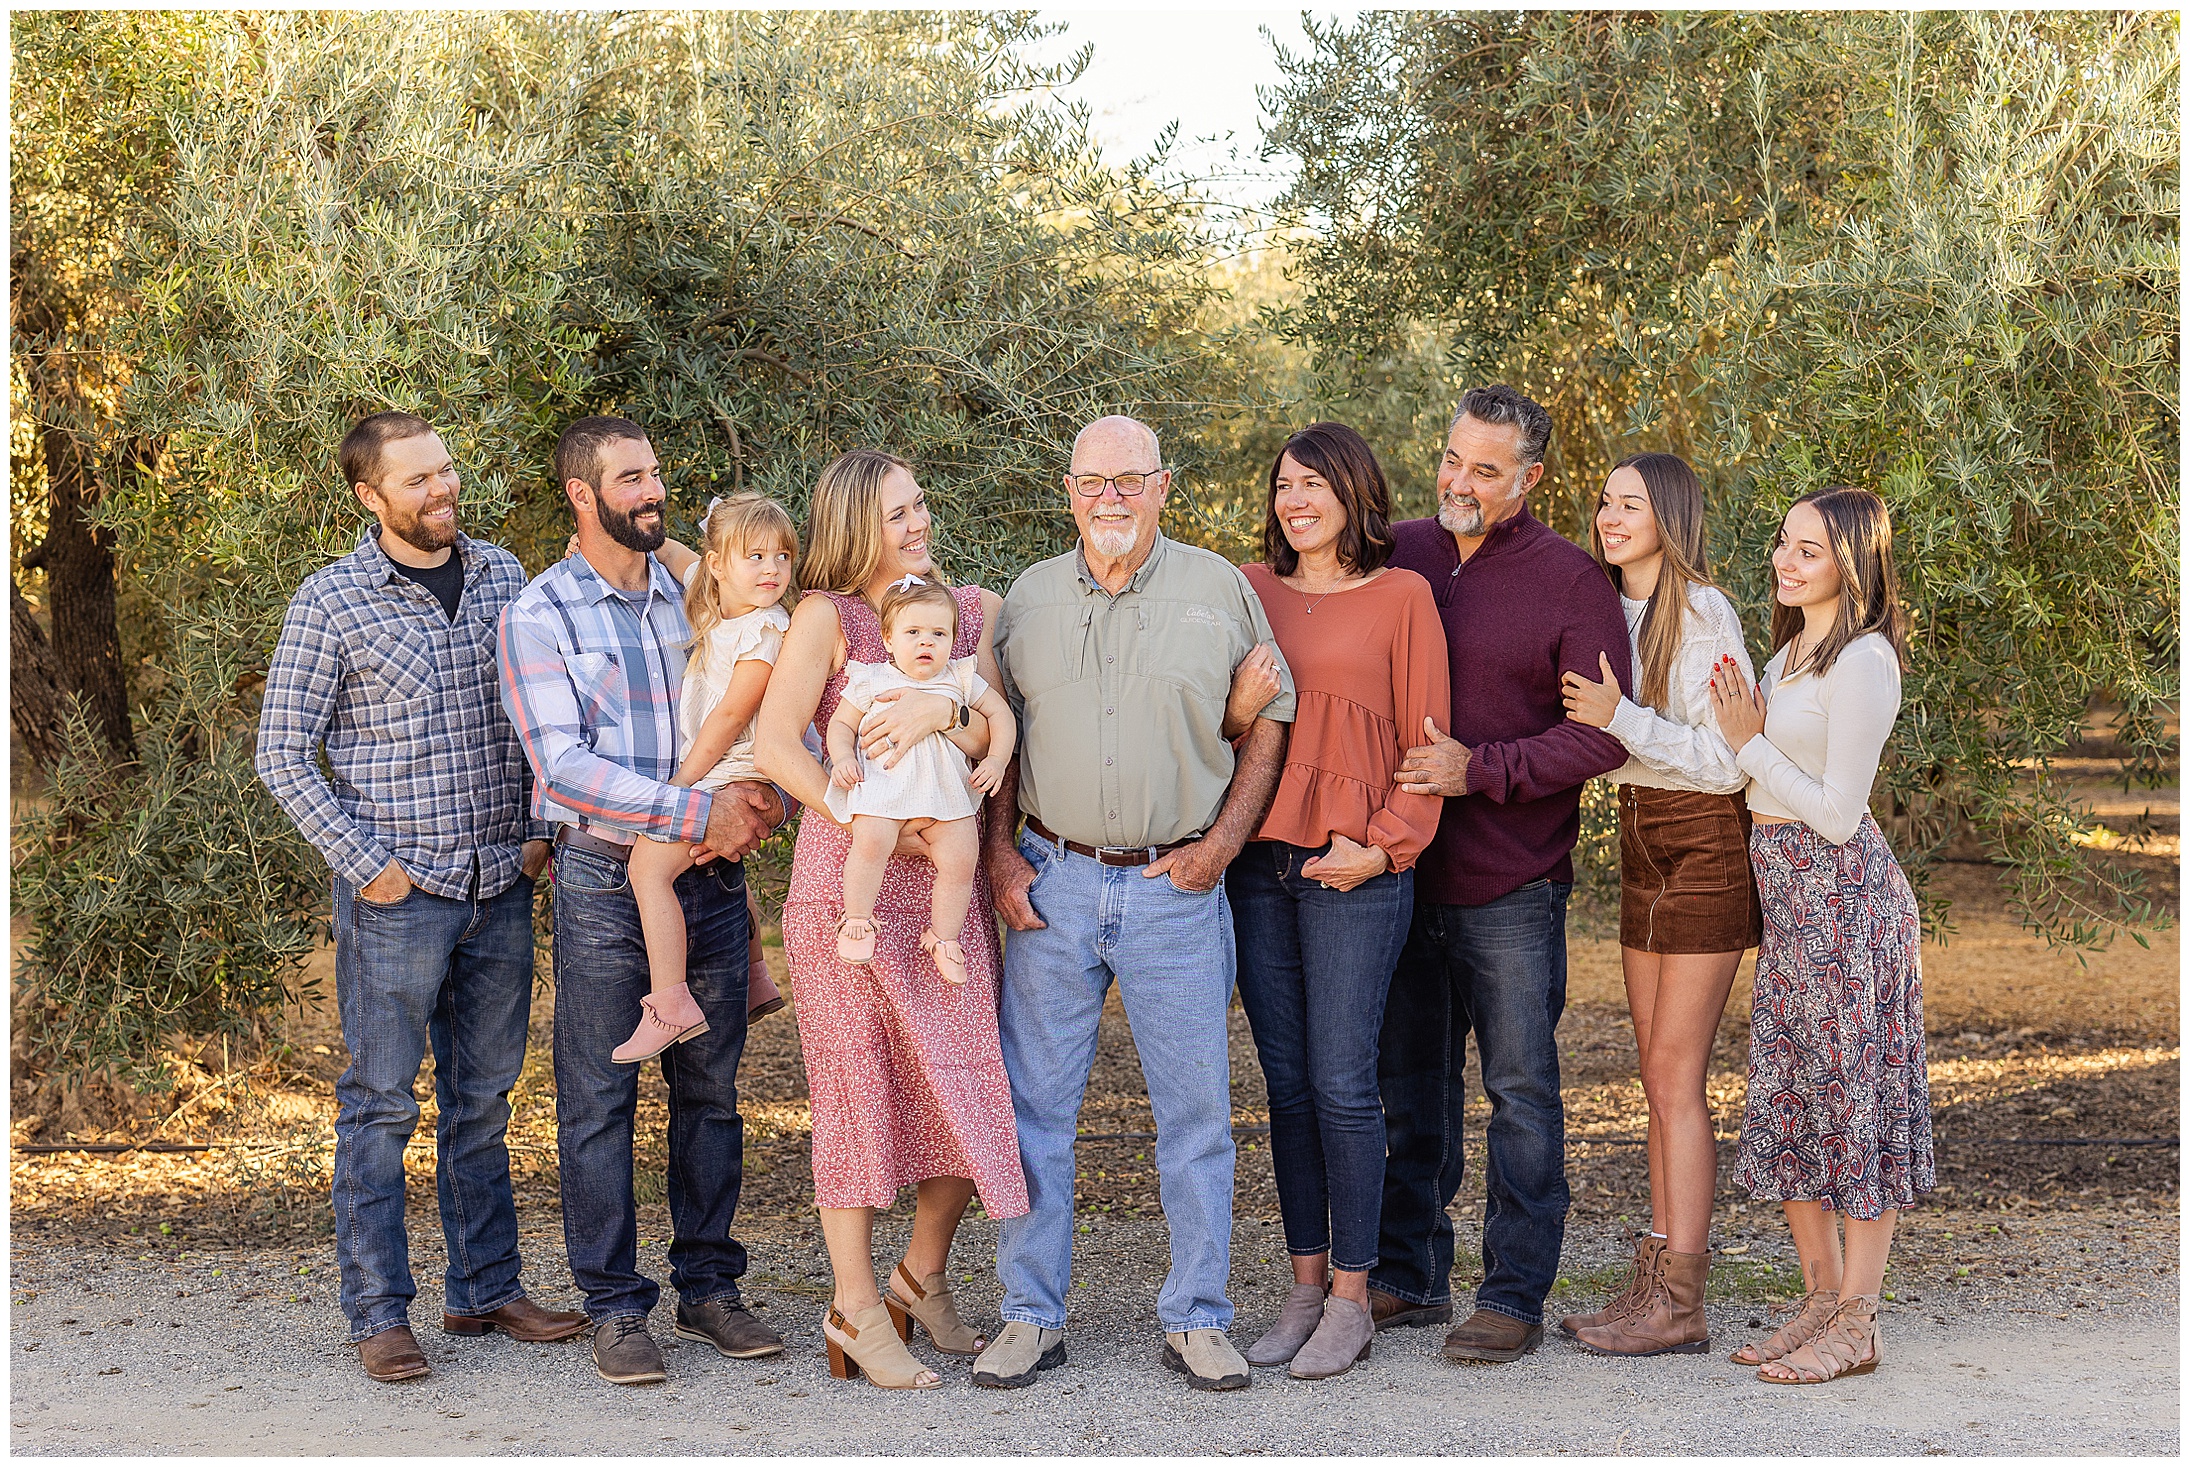 Large Extended Family in Father's Olive Orchard | Darrell + Family